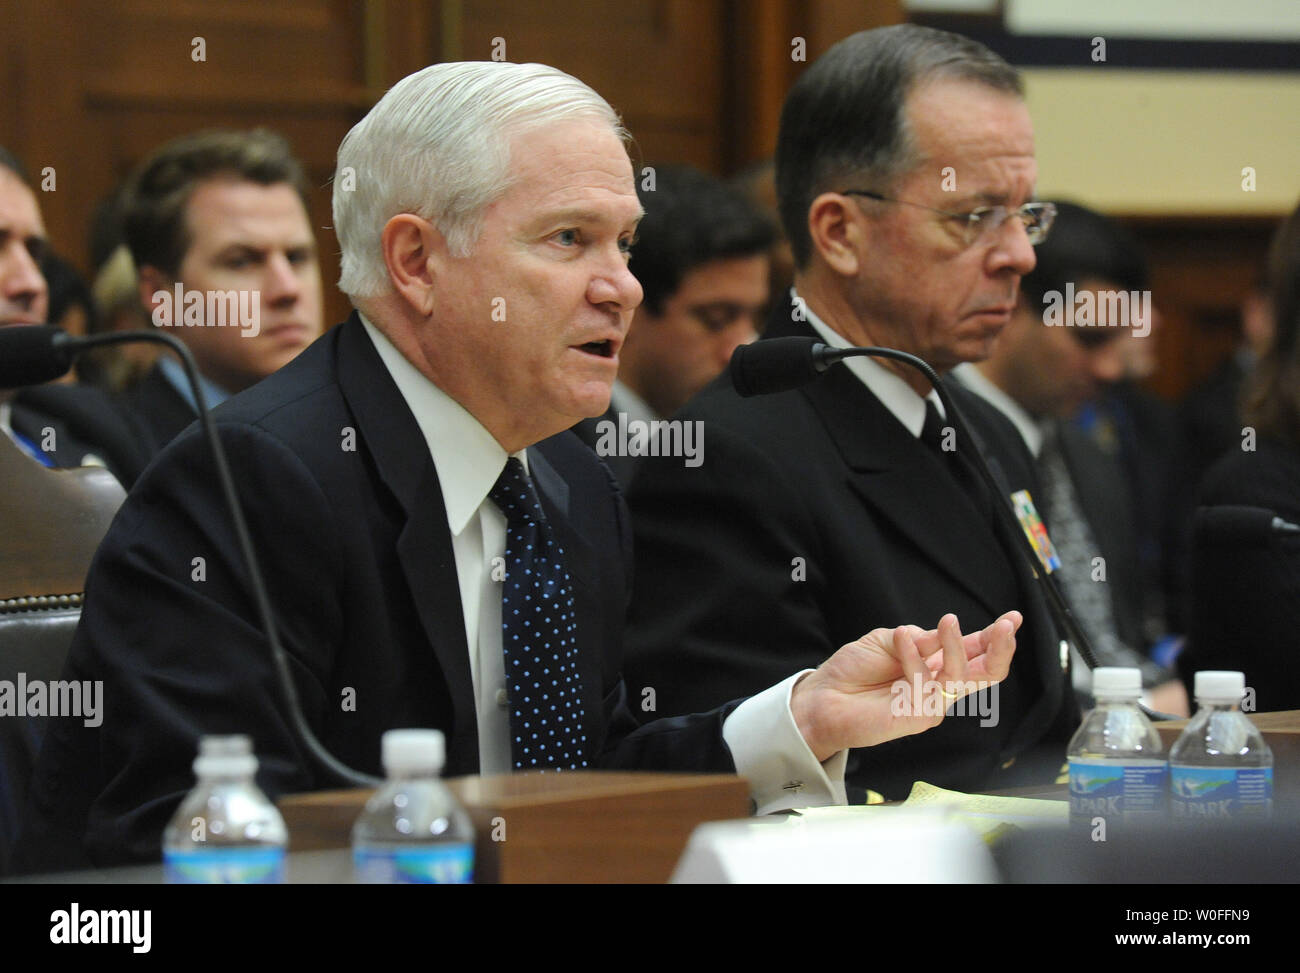 Defense Secretary Robert Gates (L) and Chairman of the Joint Chiefs of Staff Michael Mullen testify before a House Armed Services Committee hearing on the FY2011 national defense budget, in Washington on February 3, 2010.   UPI/Kevin Dietsch Stock Photo